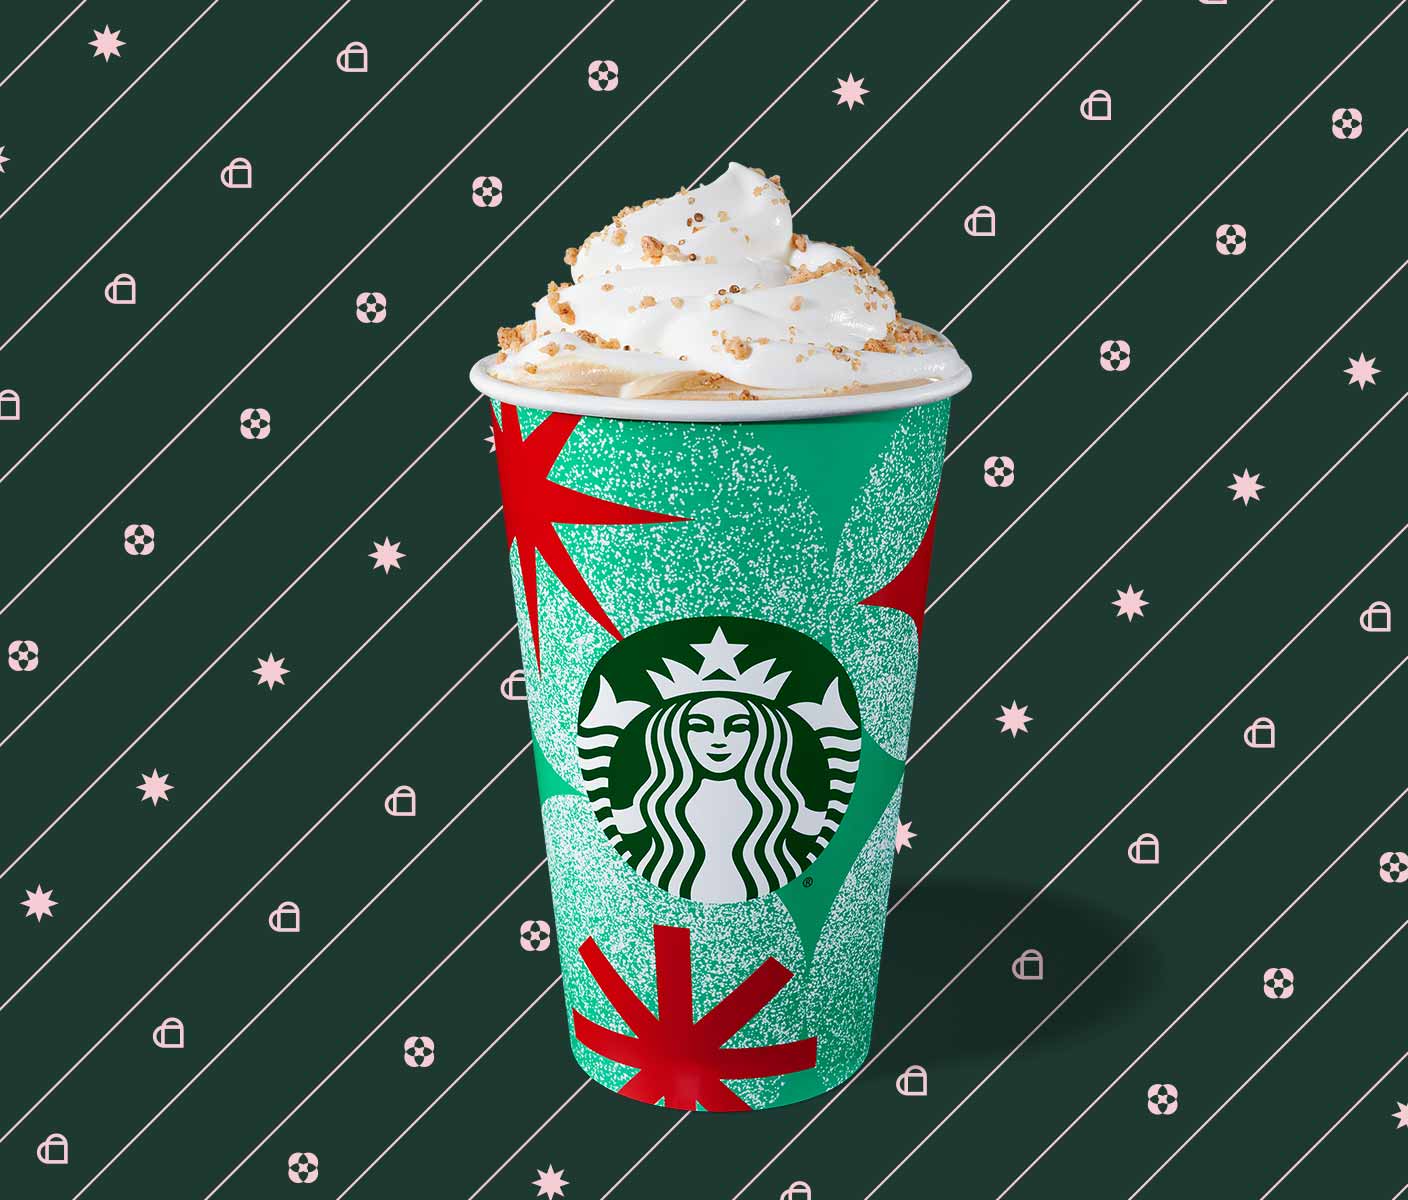 Hot espresso drink with whipped cream in a to-go cup with red stars on a green background.